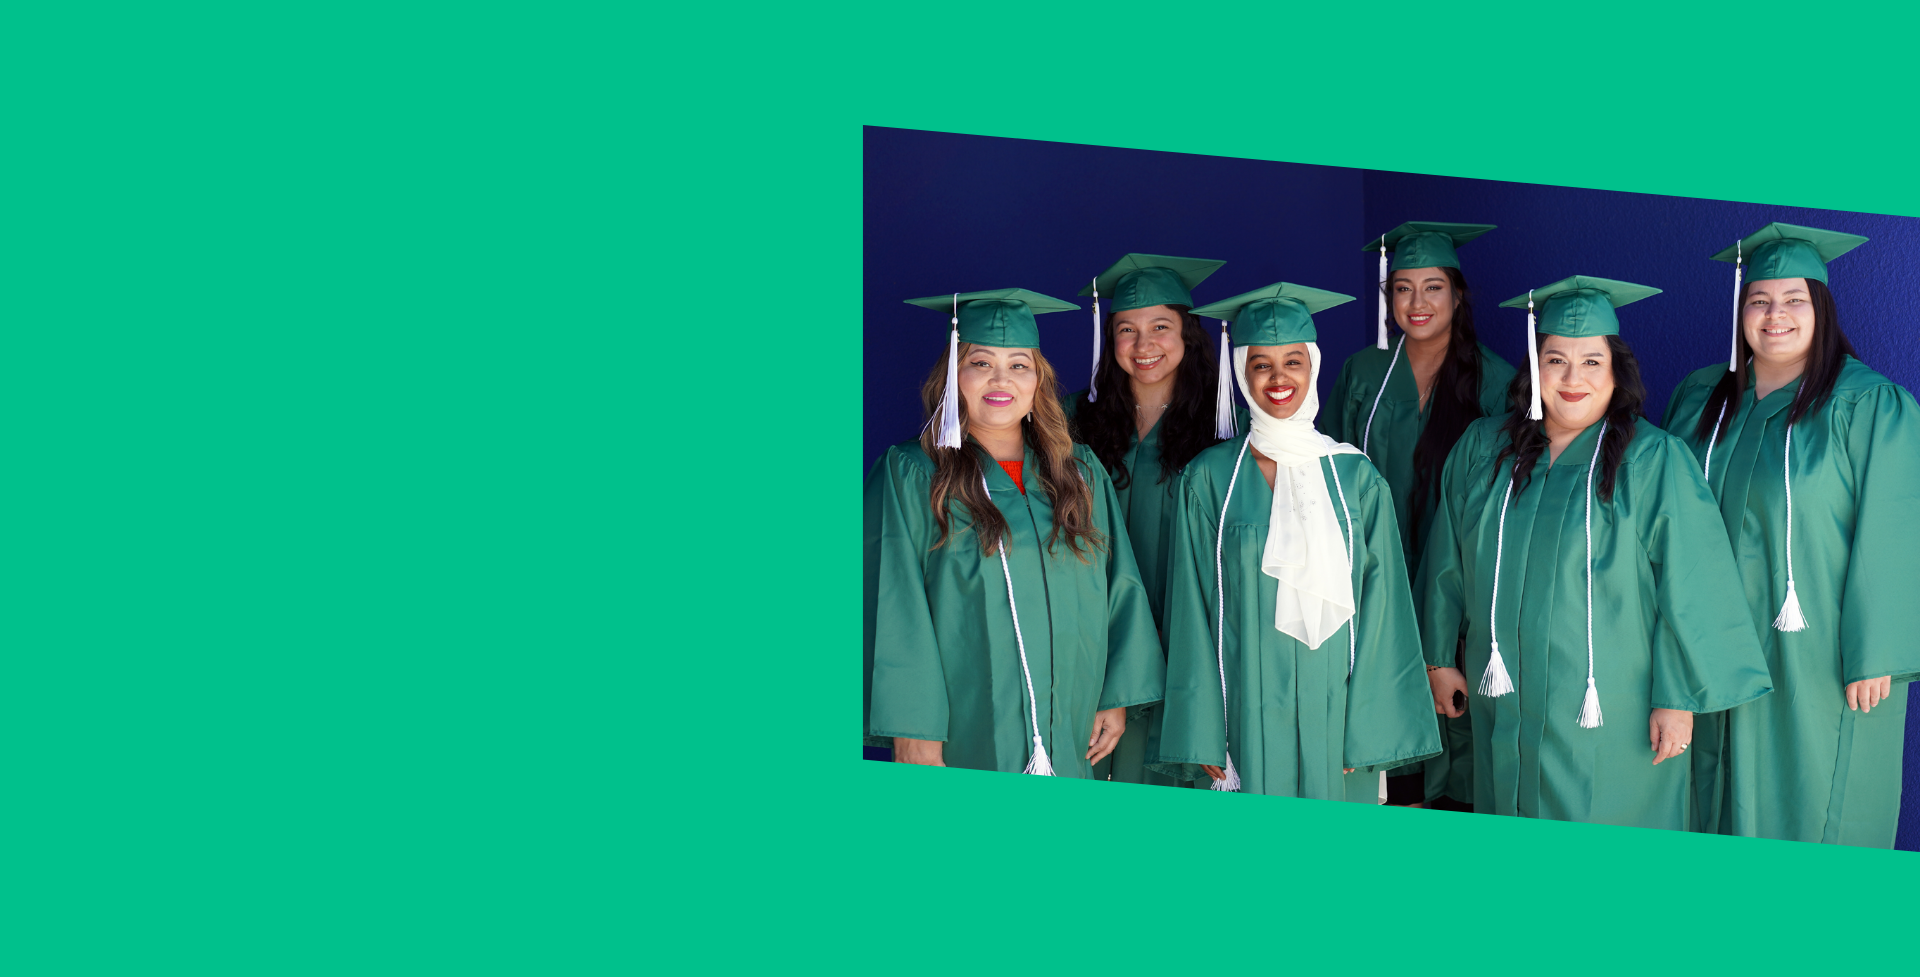 Group of women in graduation outfits